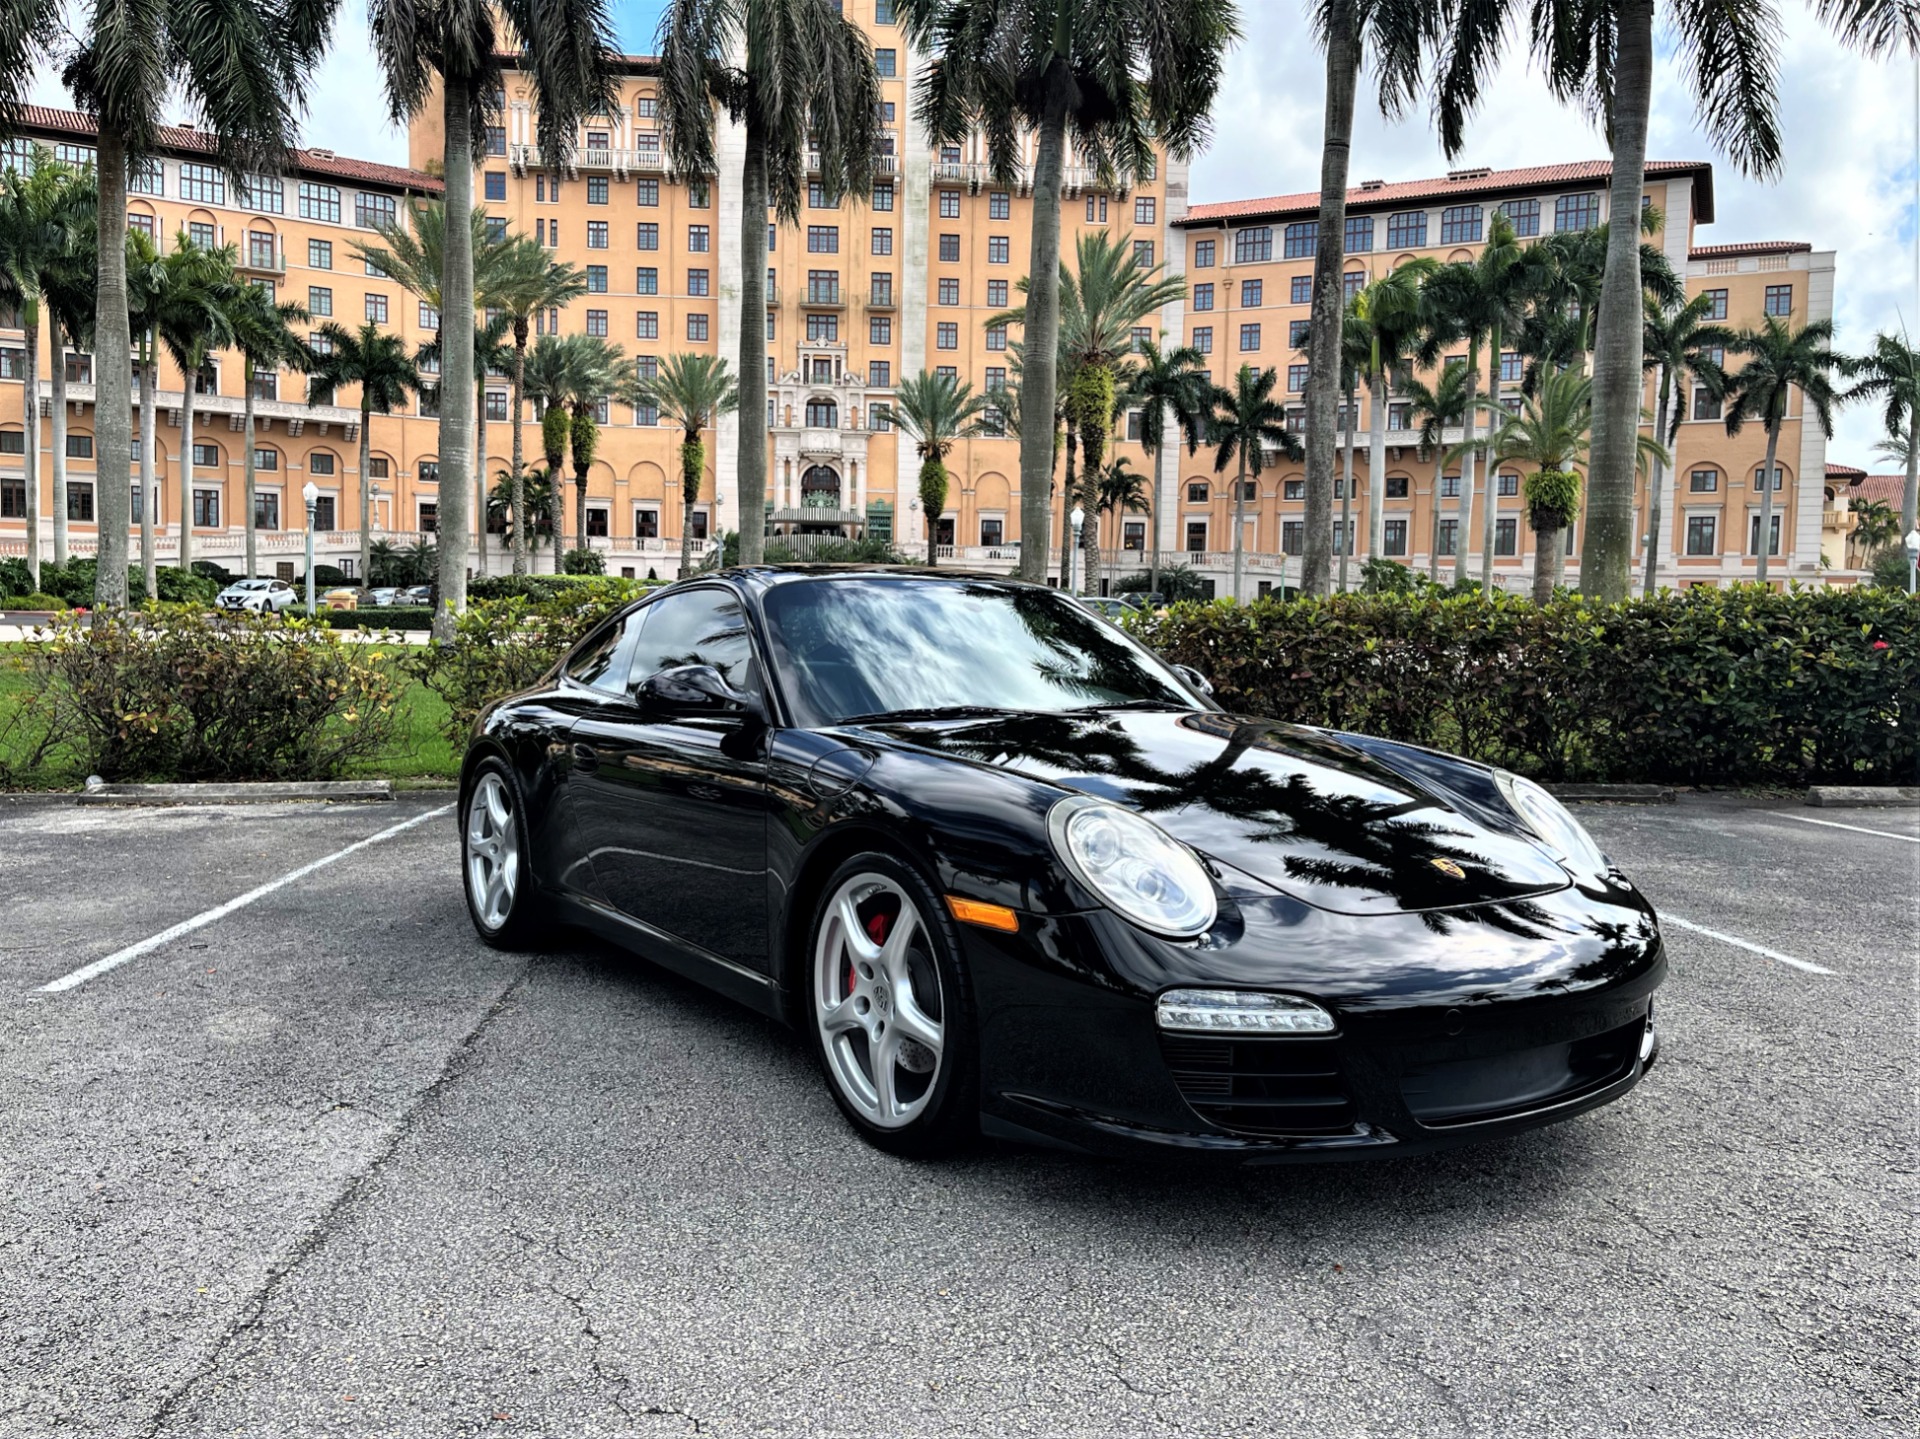 Used 2011 Porsche 911 Carrera S for sale Sold at The Gables Sports Cars in Miami FL 33146 2